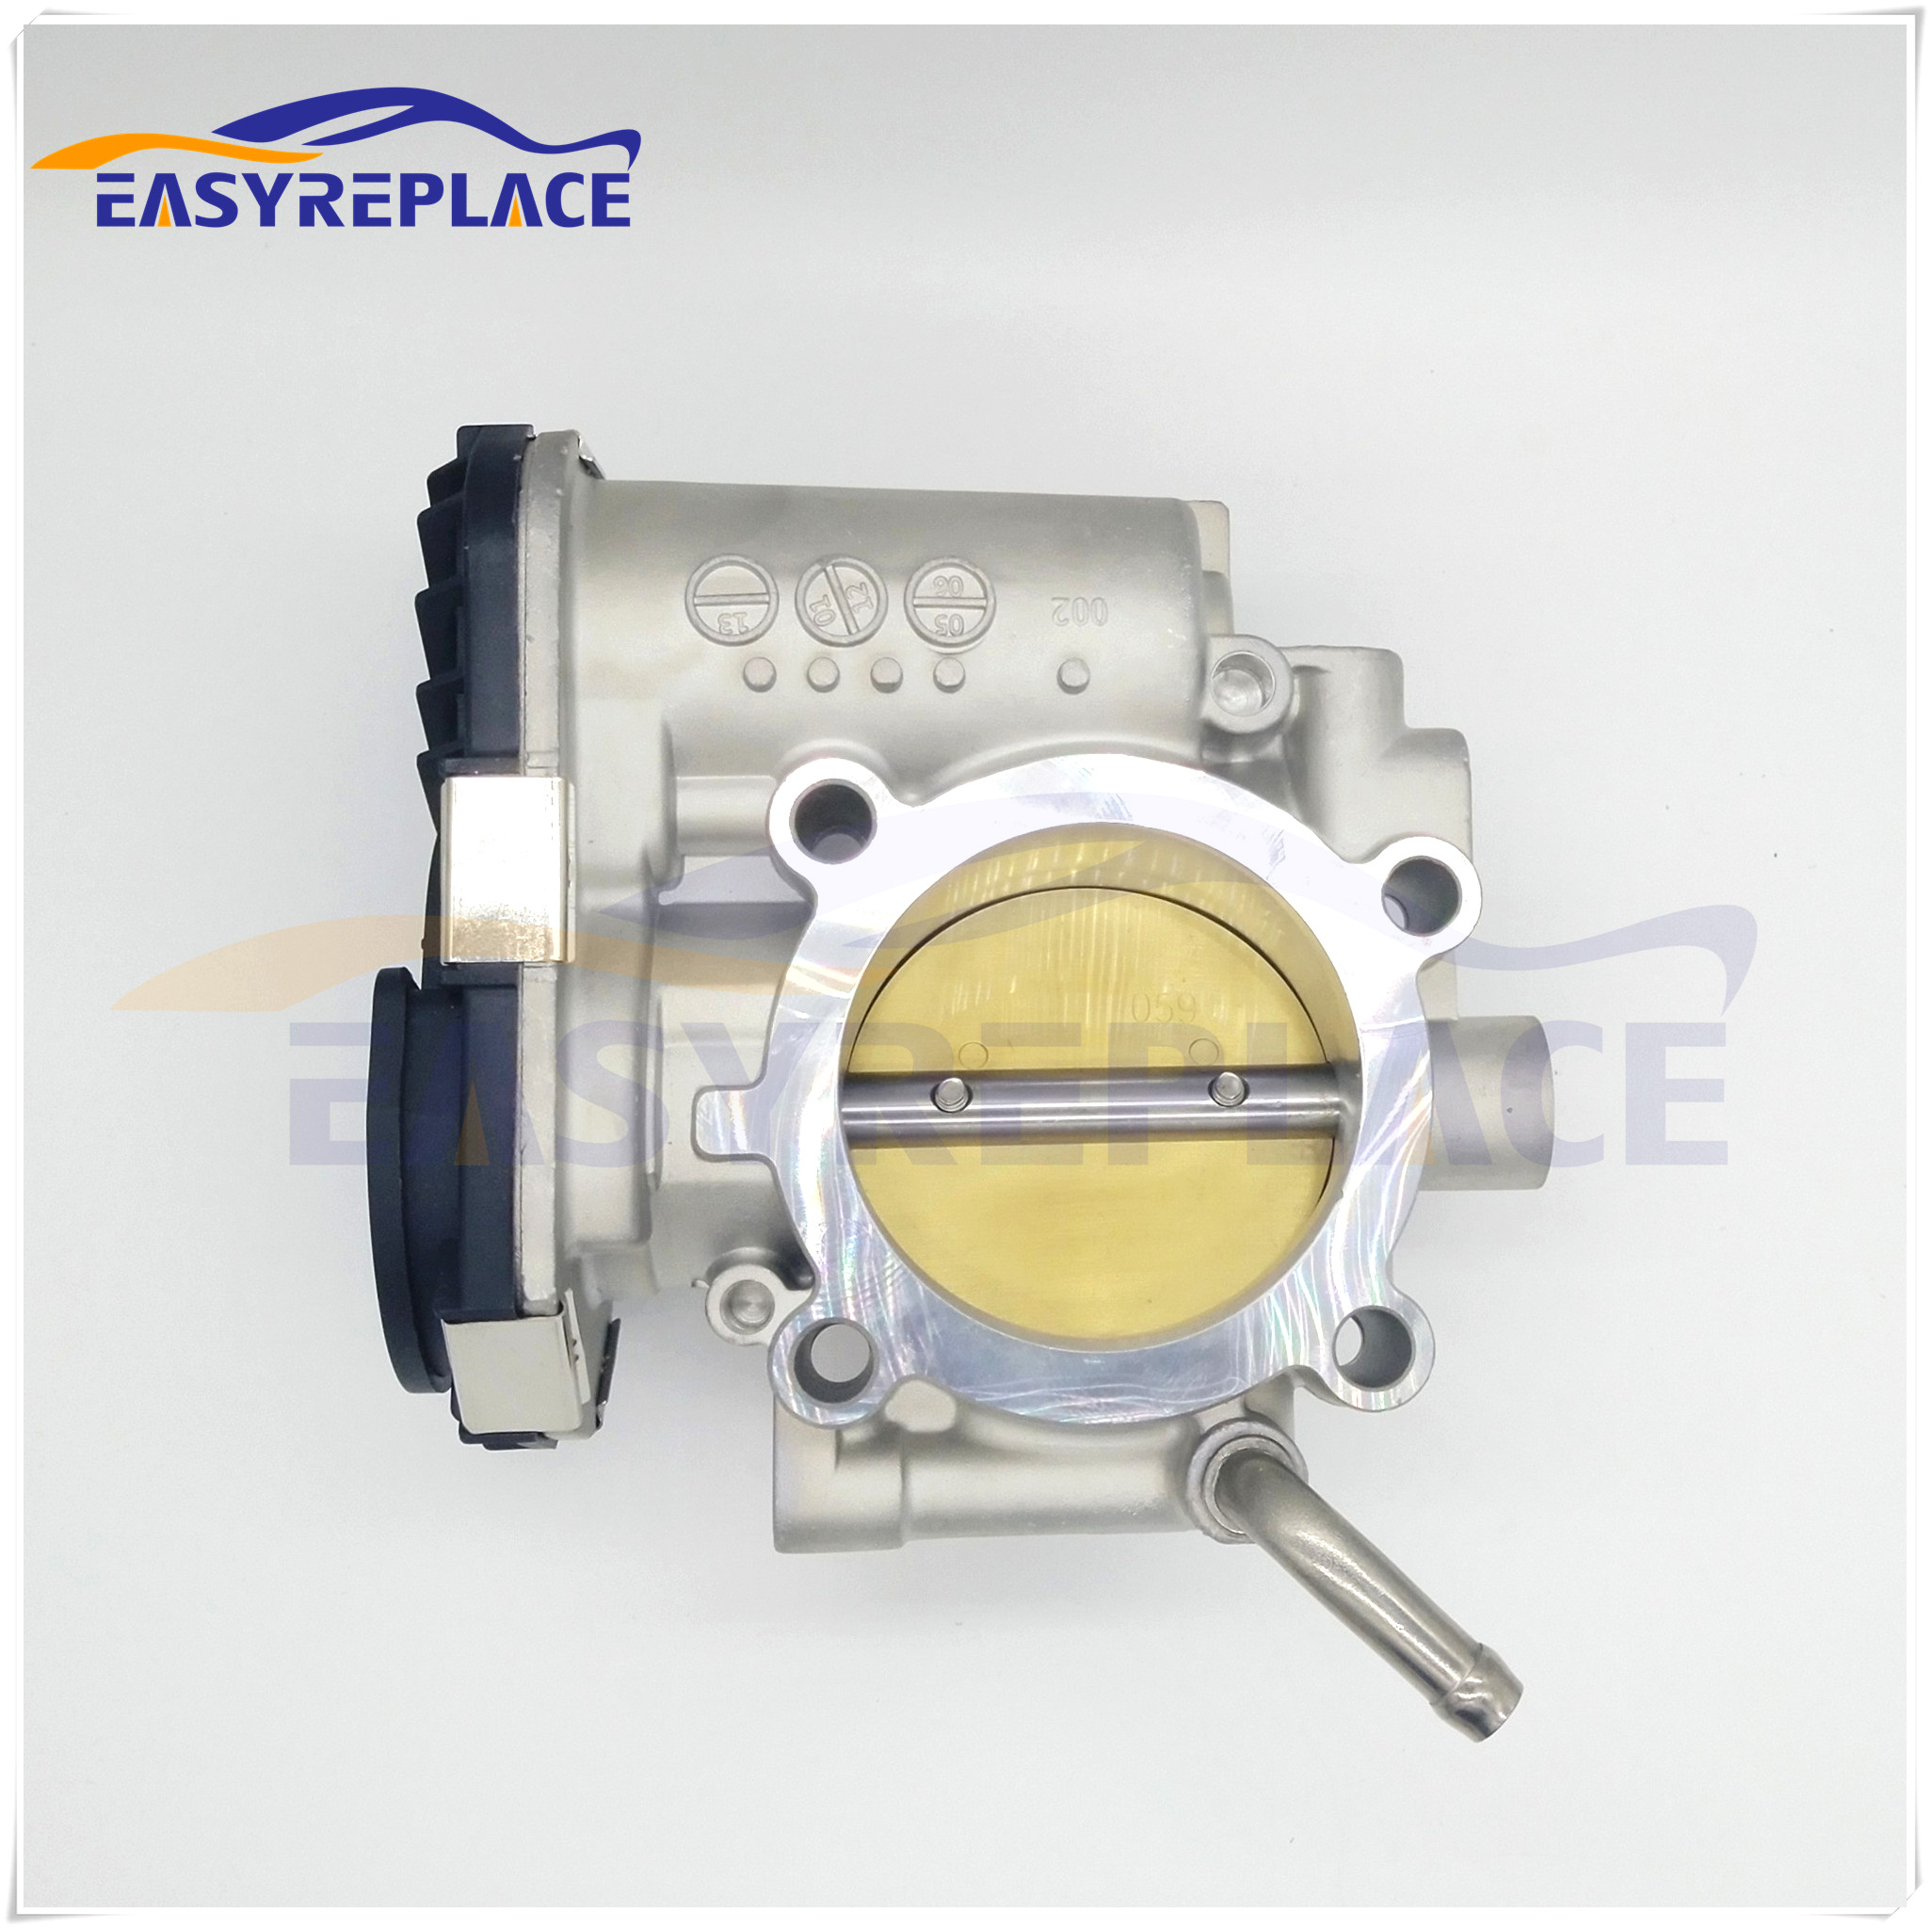 Fuel Injection Brand New Throttle body Valve OE: 96817600 0280750494 For Chevrolet cruze 1.6L 109 Horse Power